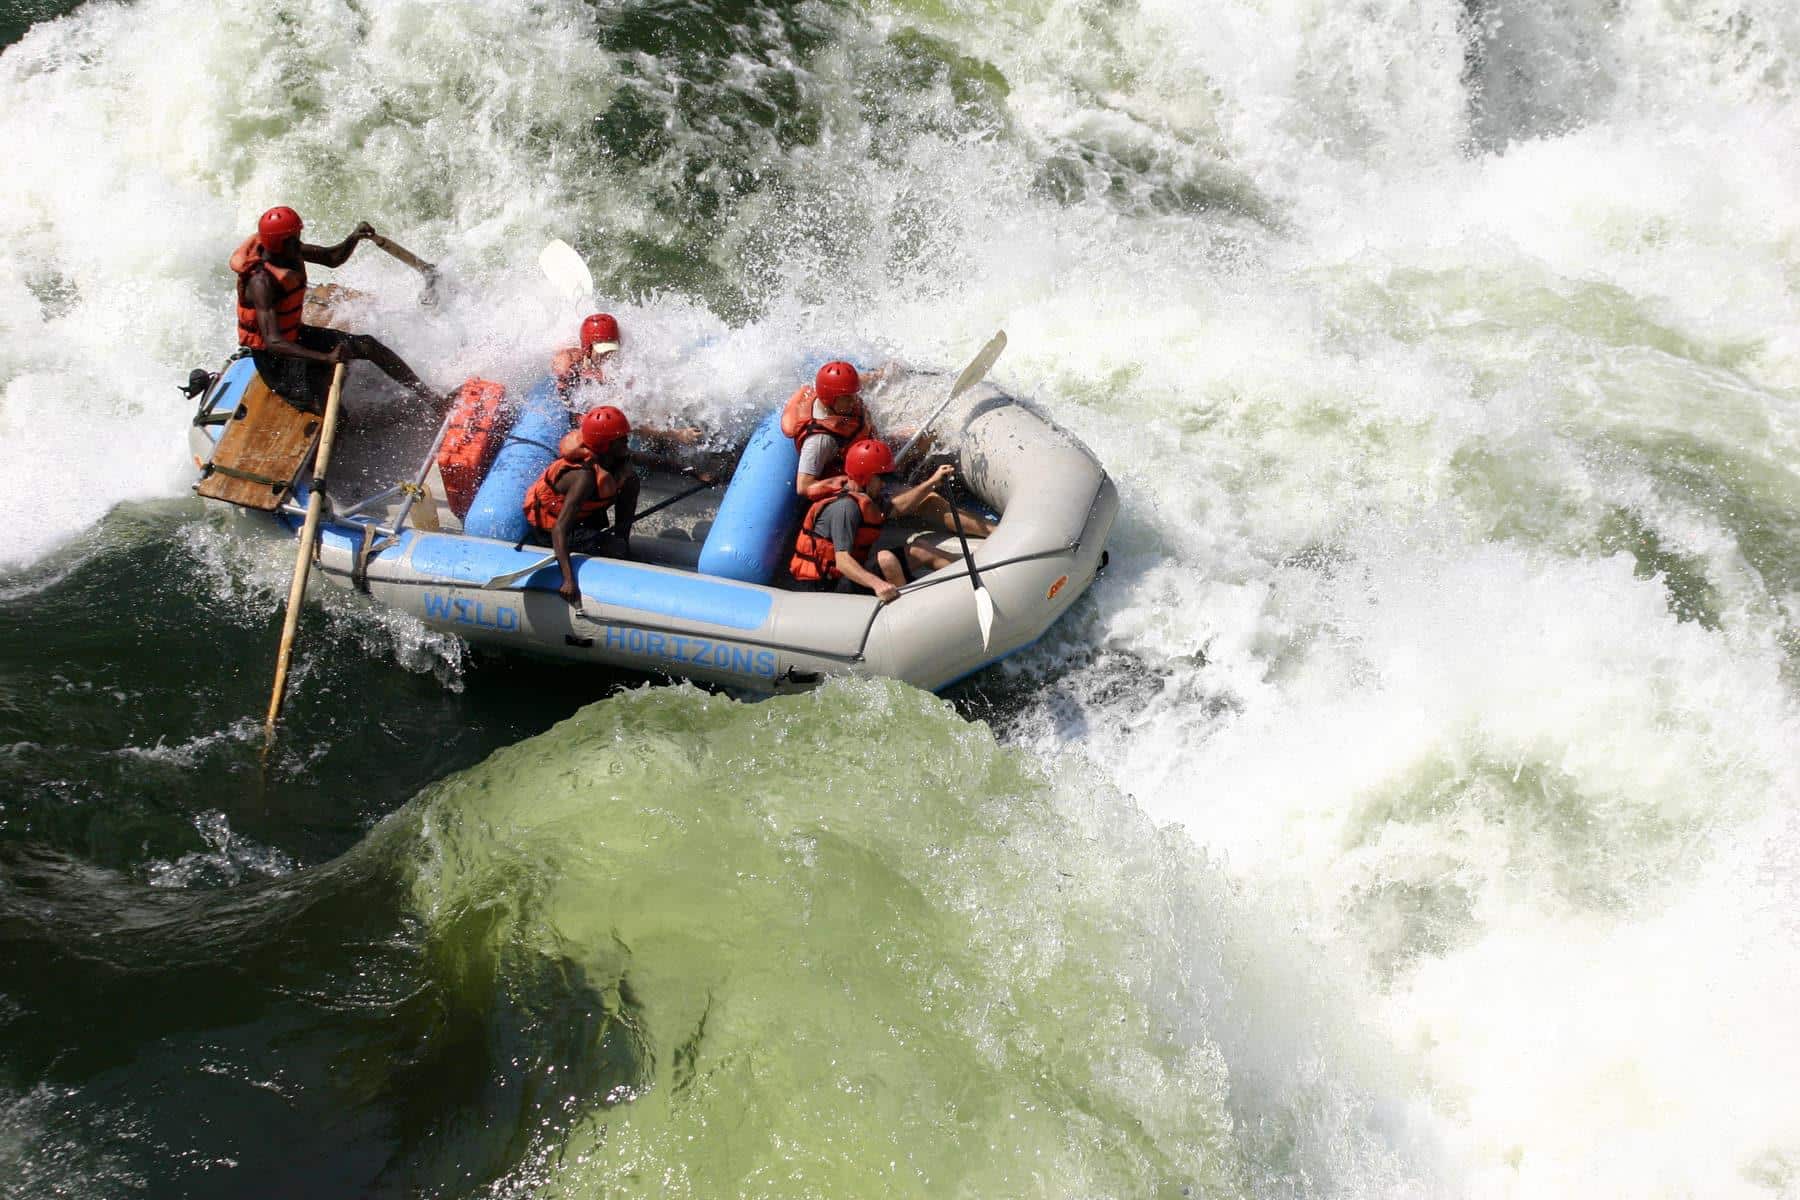 Whitewater rafting at Victoria Falls